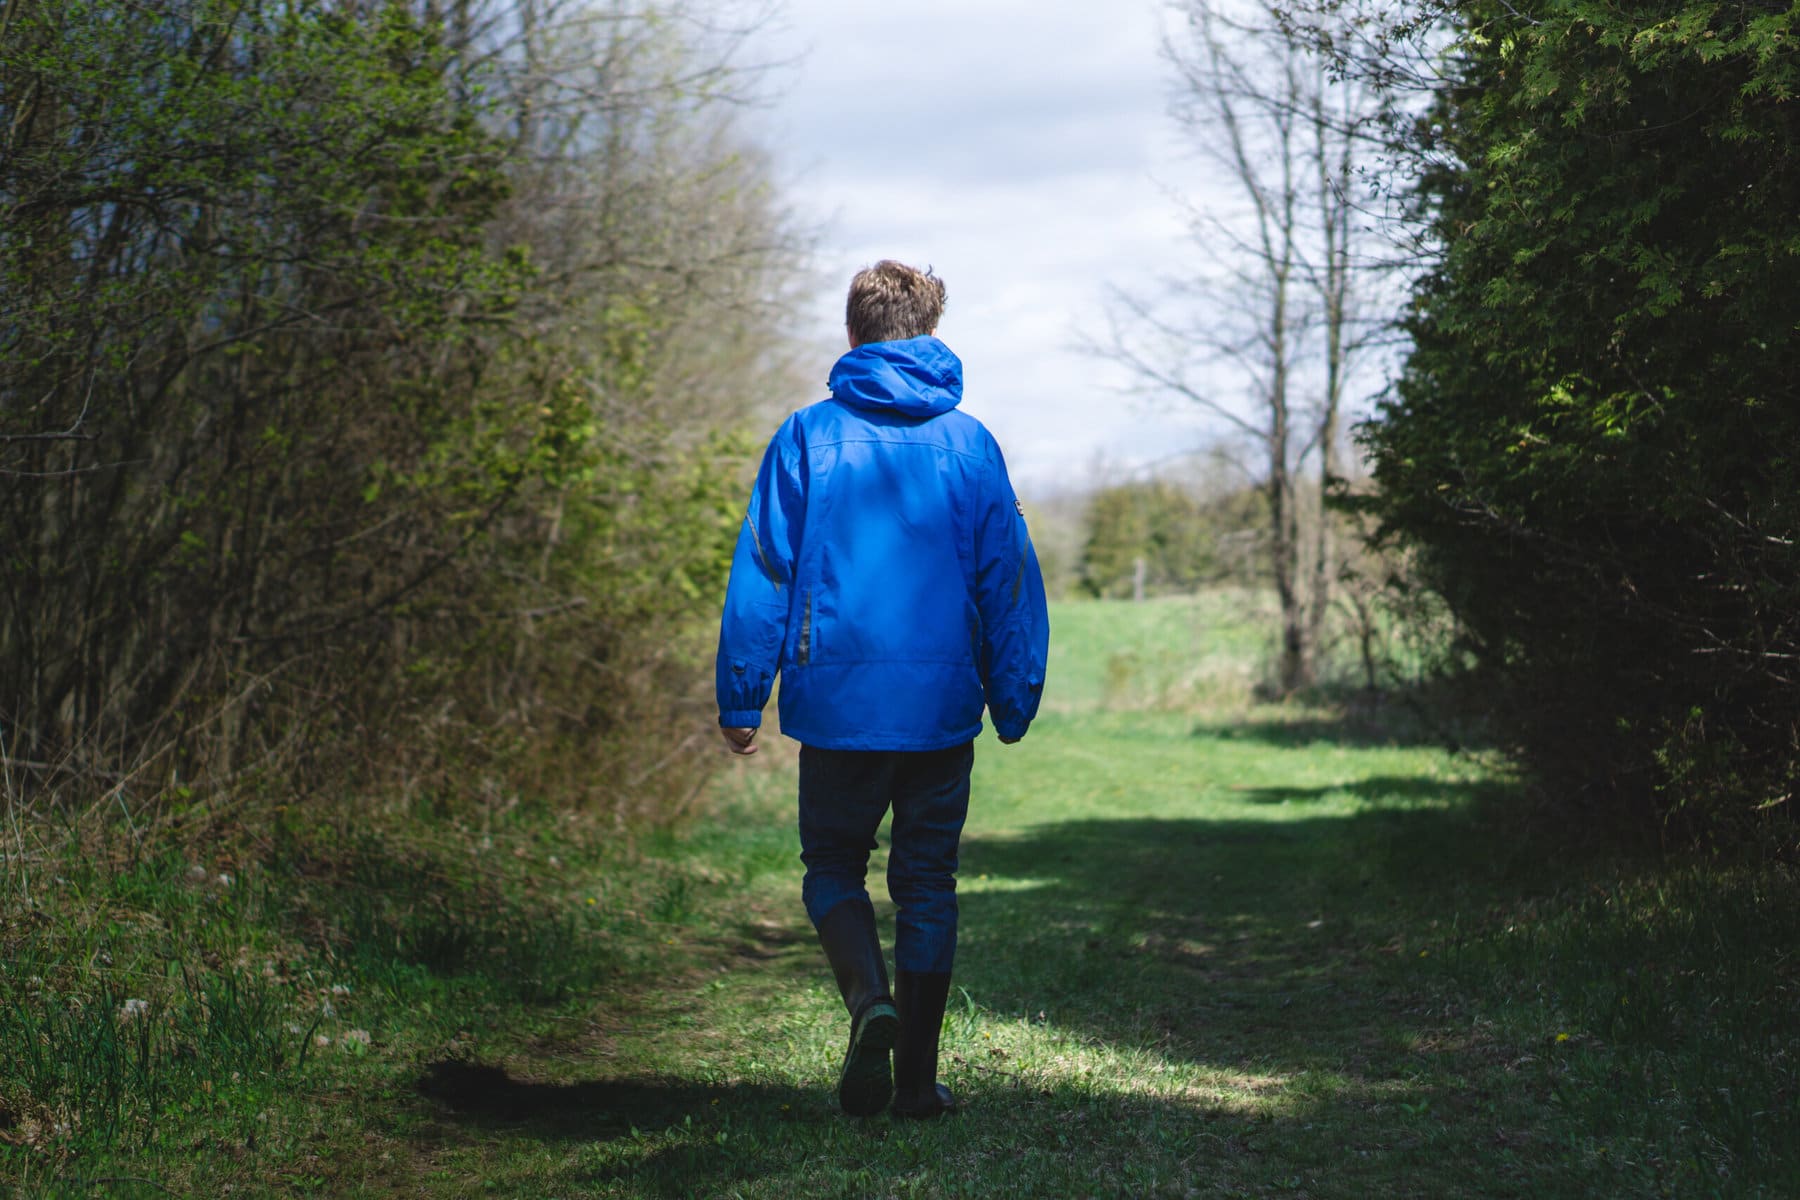 Person in a blue jacket, walking away from the camera through a field with trees on either side of them.